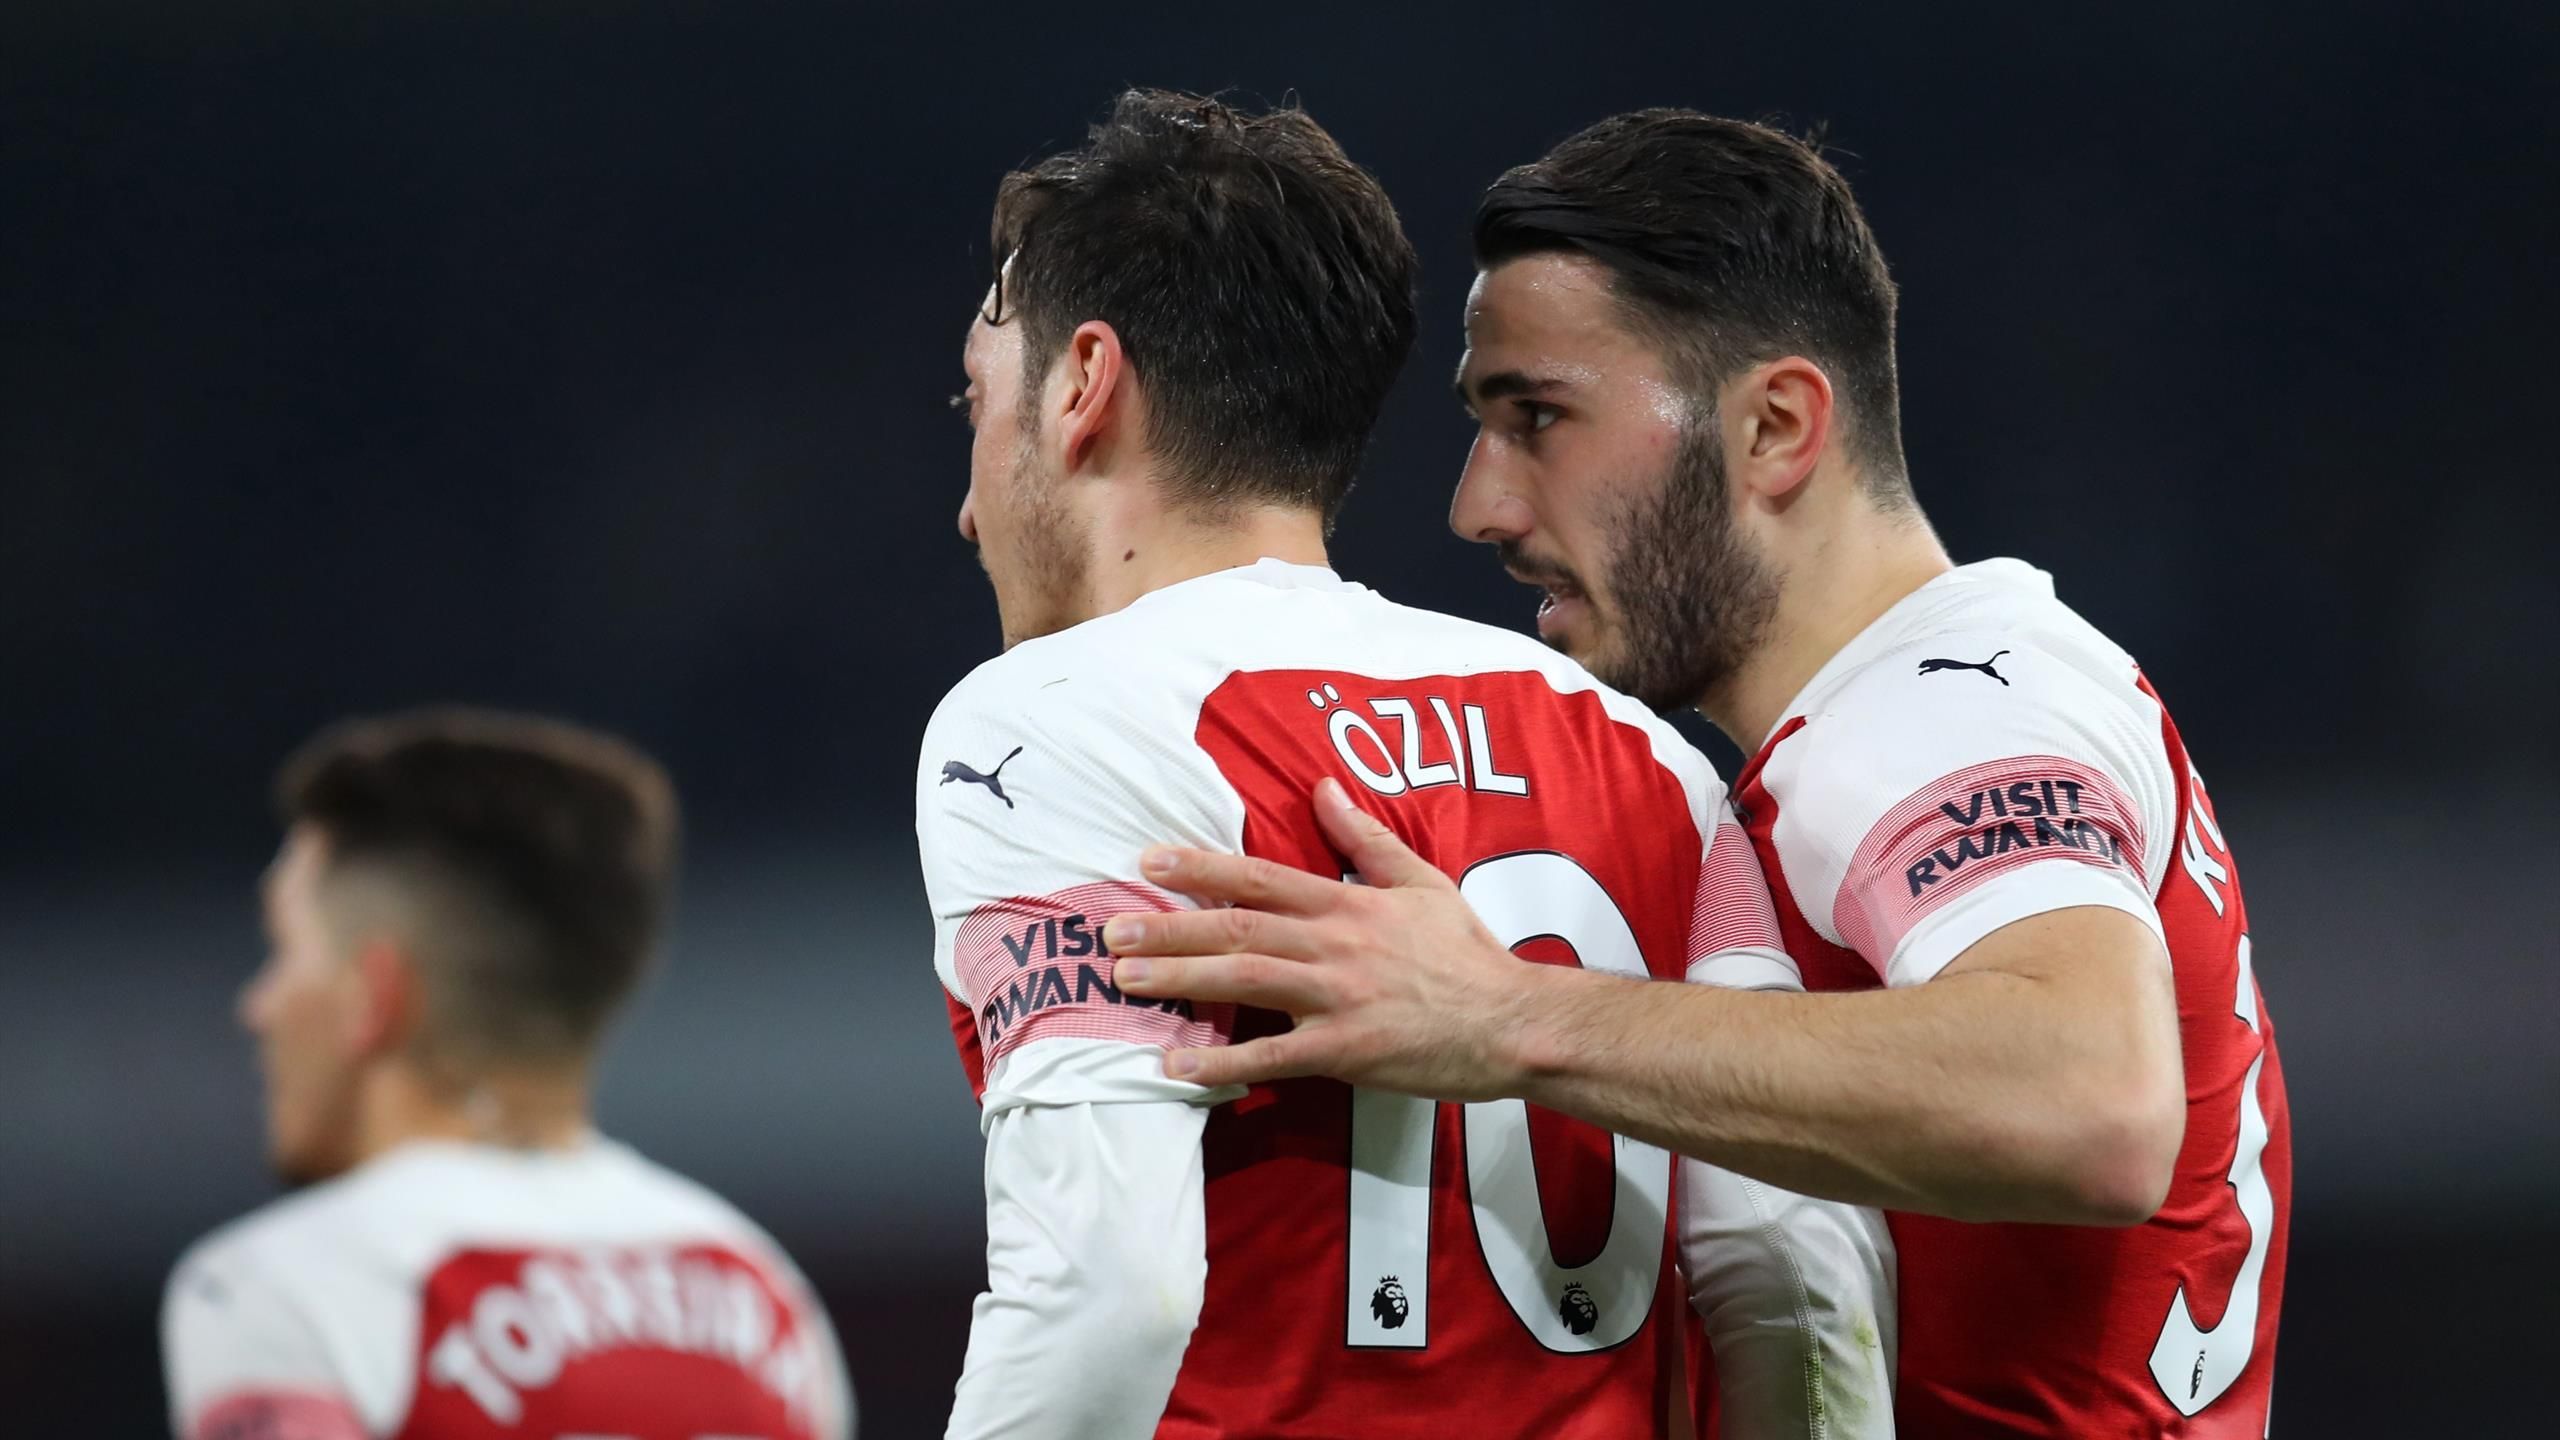 Football news men charged after confrontation outside Mesut